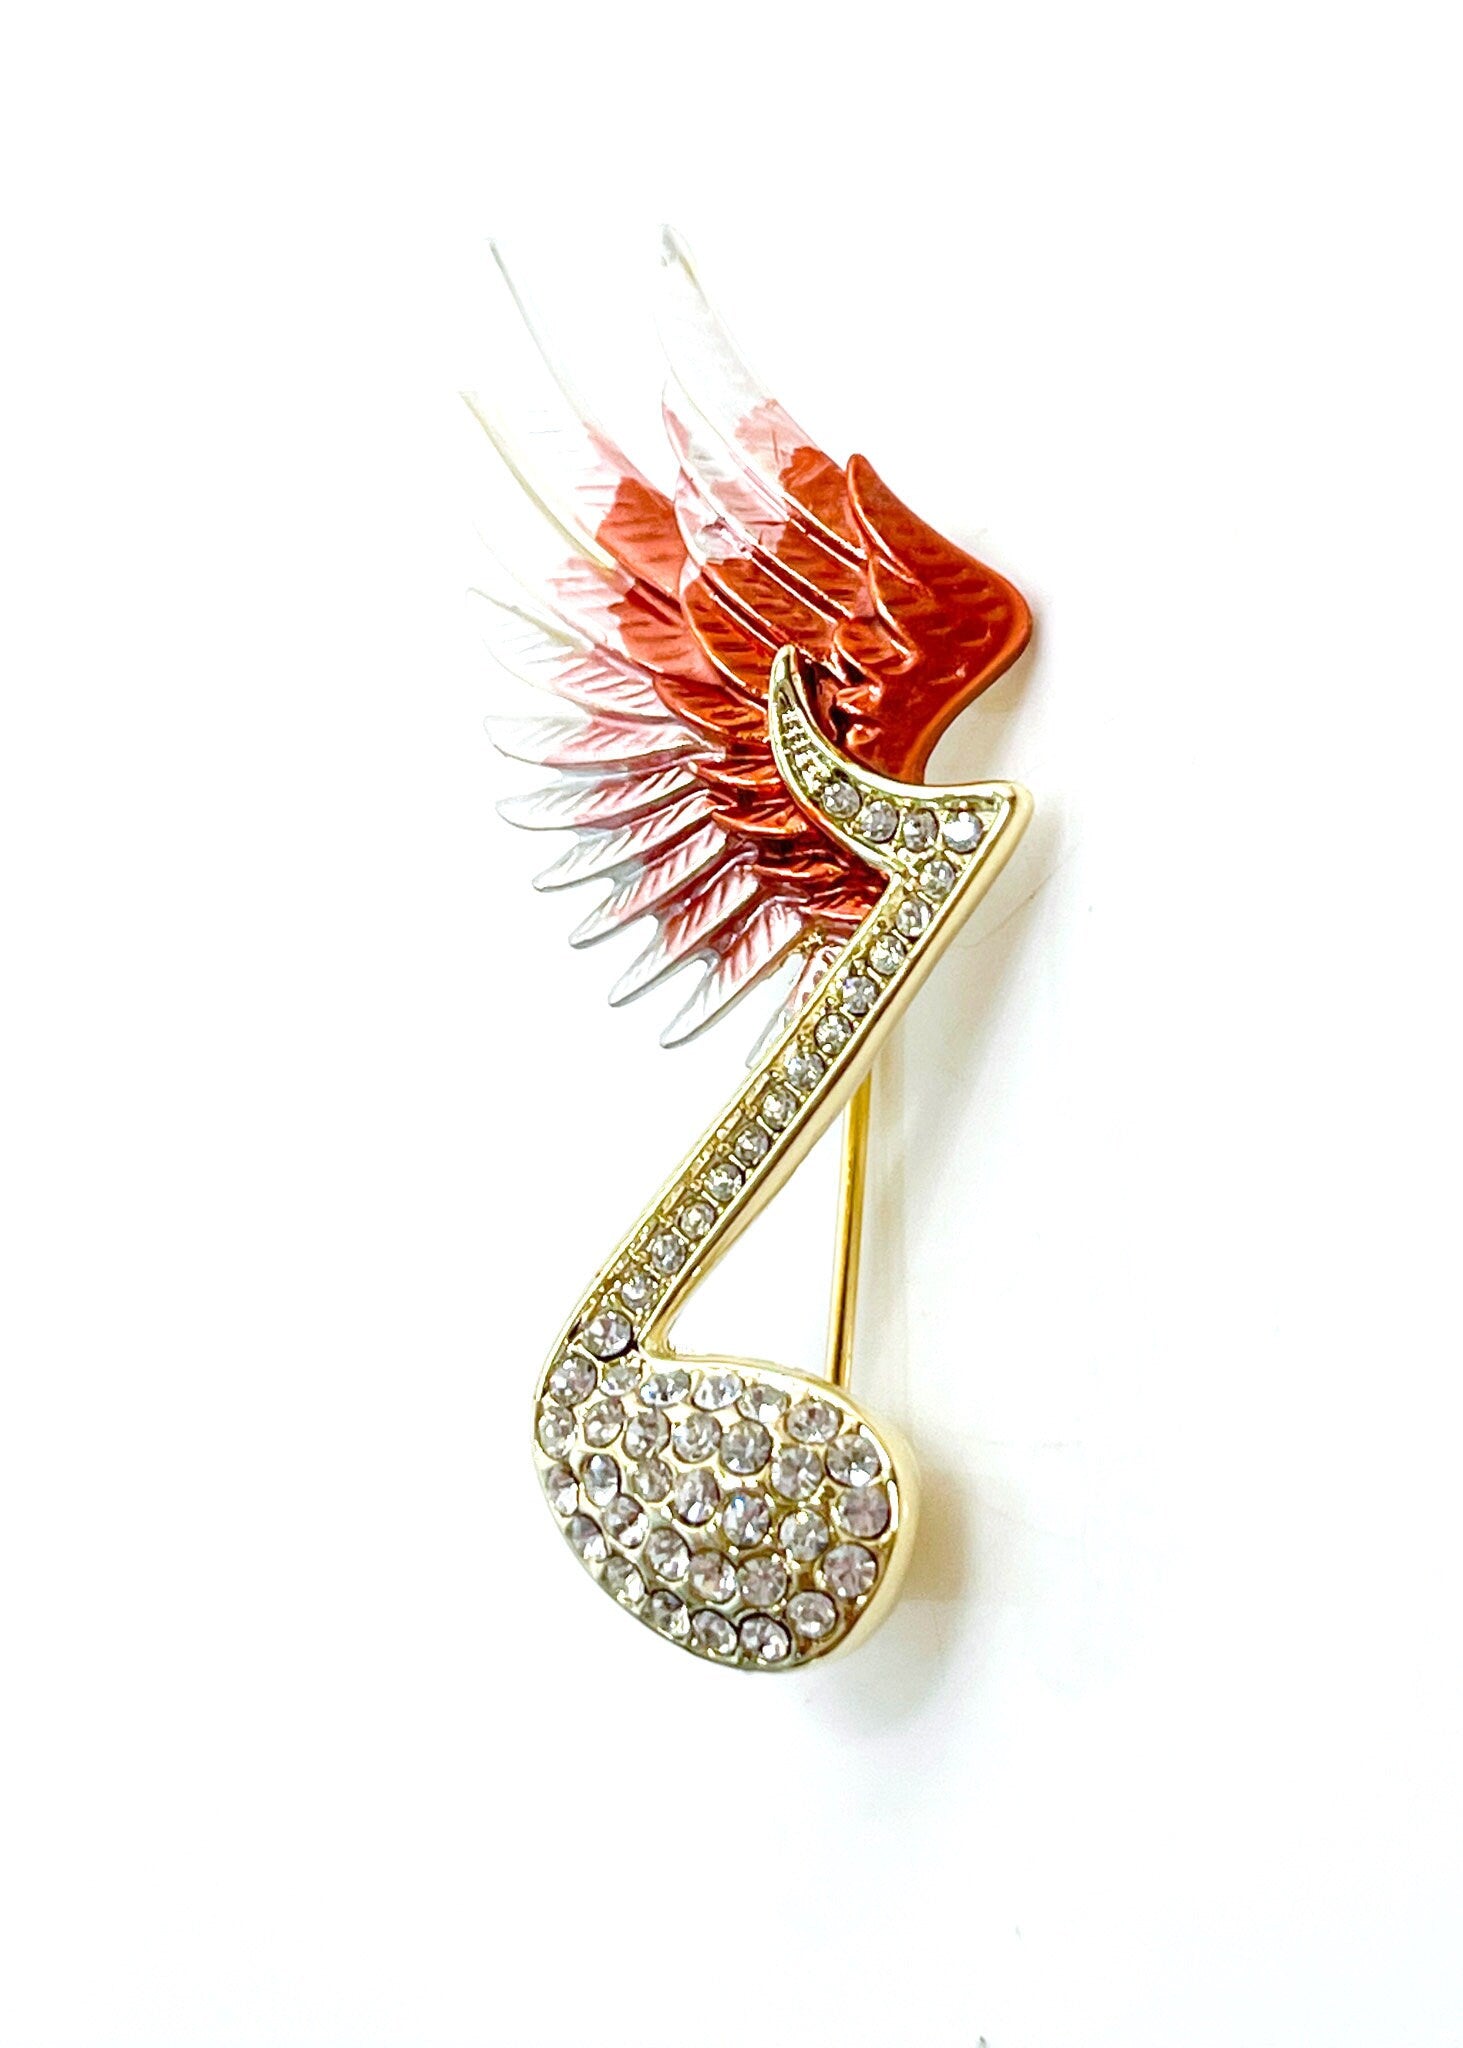 Flying Music Note Brooch | Red Wing Gold Crystal Pin | Crystal Treble Clef